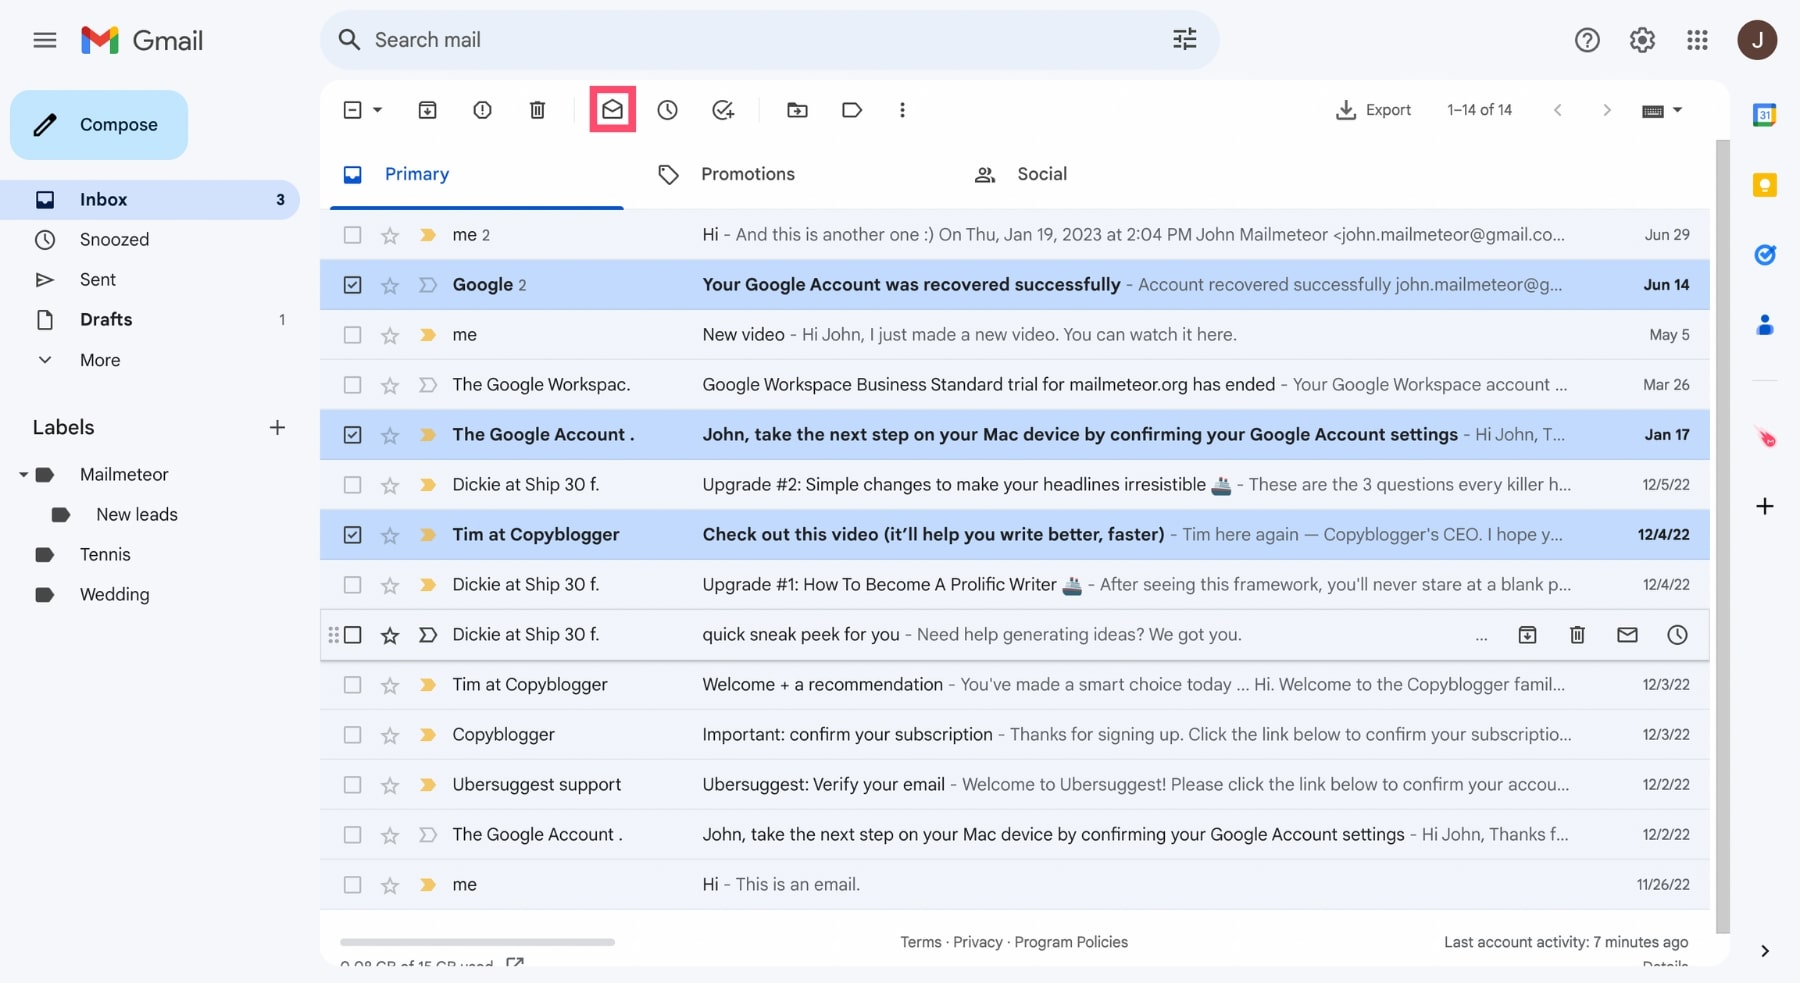 Mark multiple emails as read in Gmail